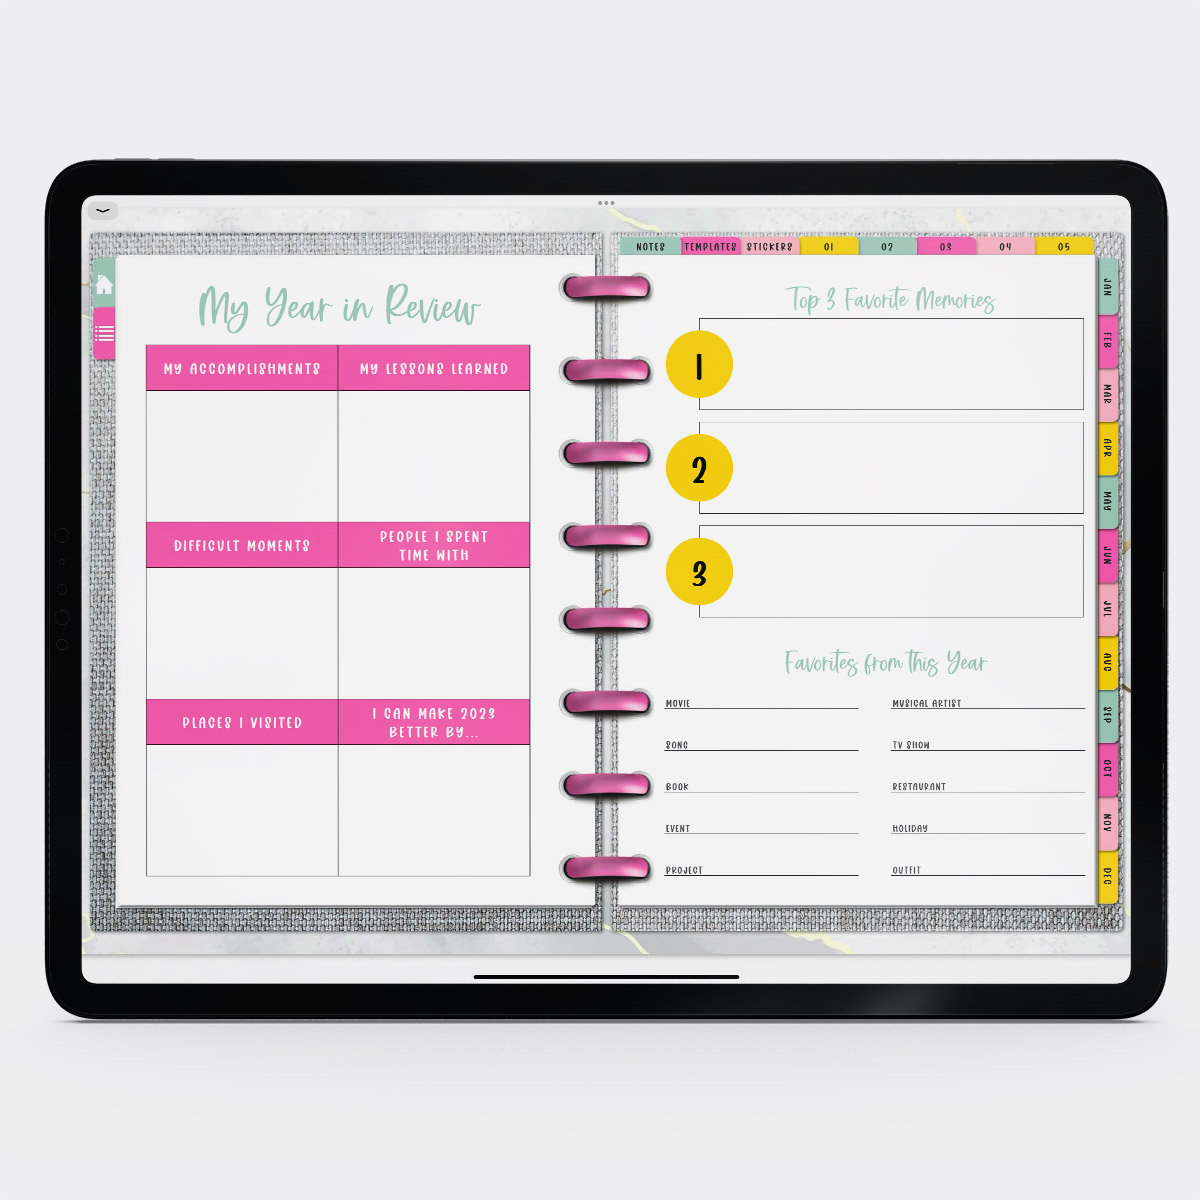 This image shows the free digital planner you can get in this post. It is open to the year in review template.